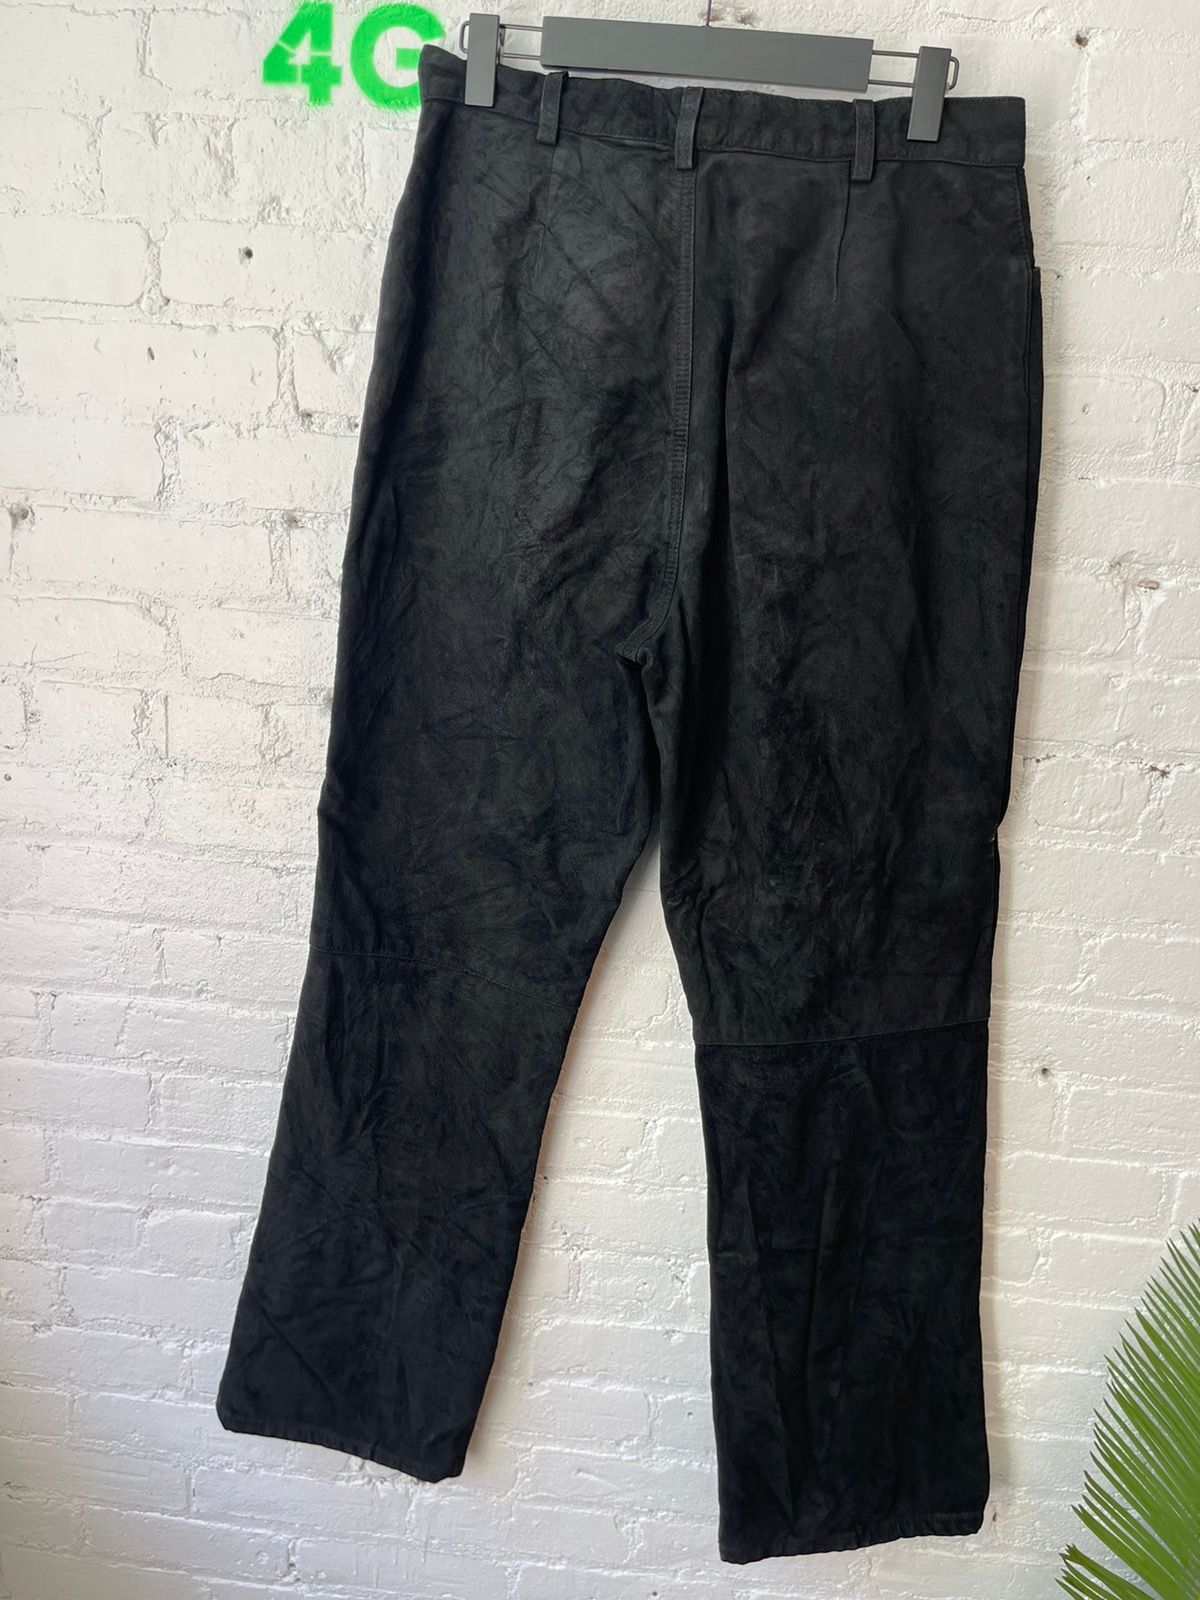 Vintage TEXTURED SUEDE LEATHER Baggy Pants !! Fits 31 or 32